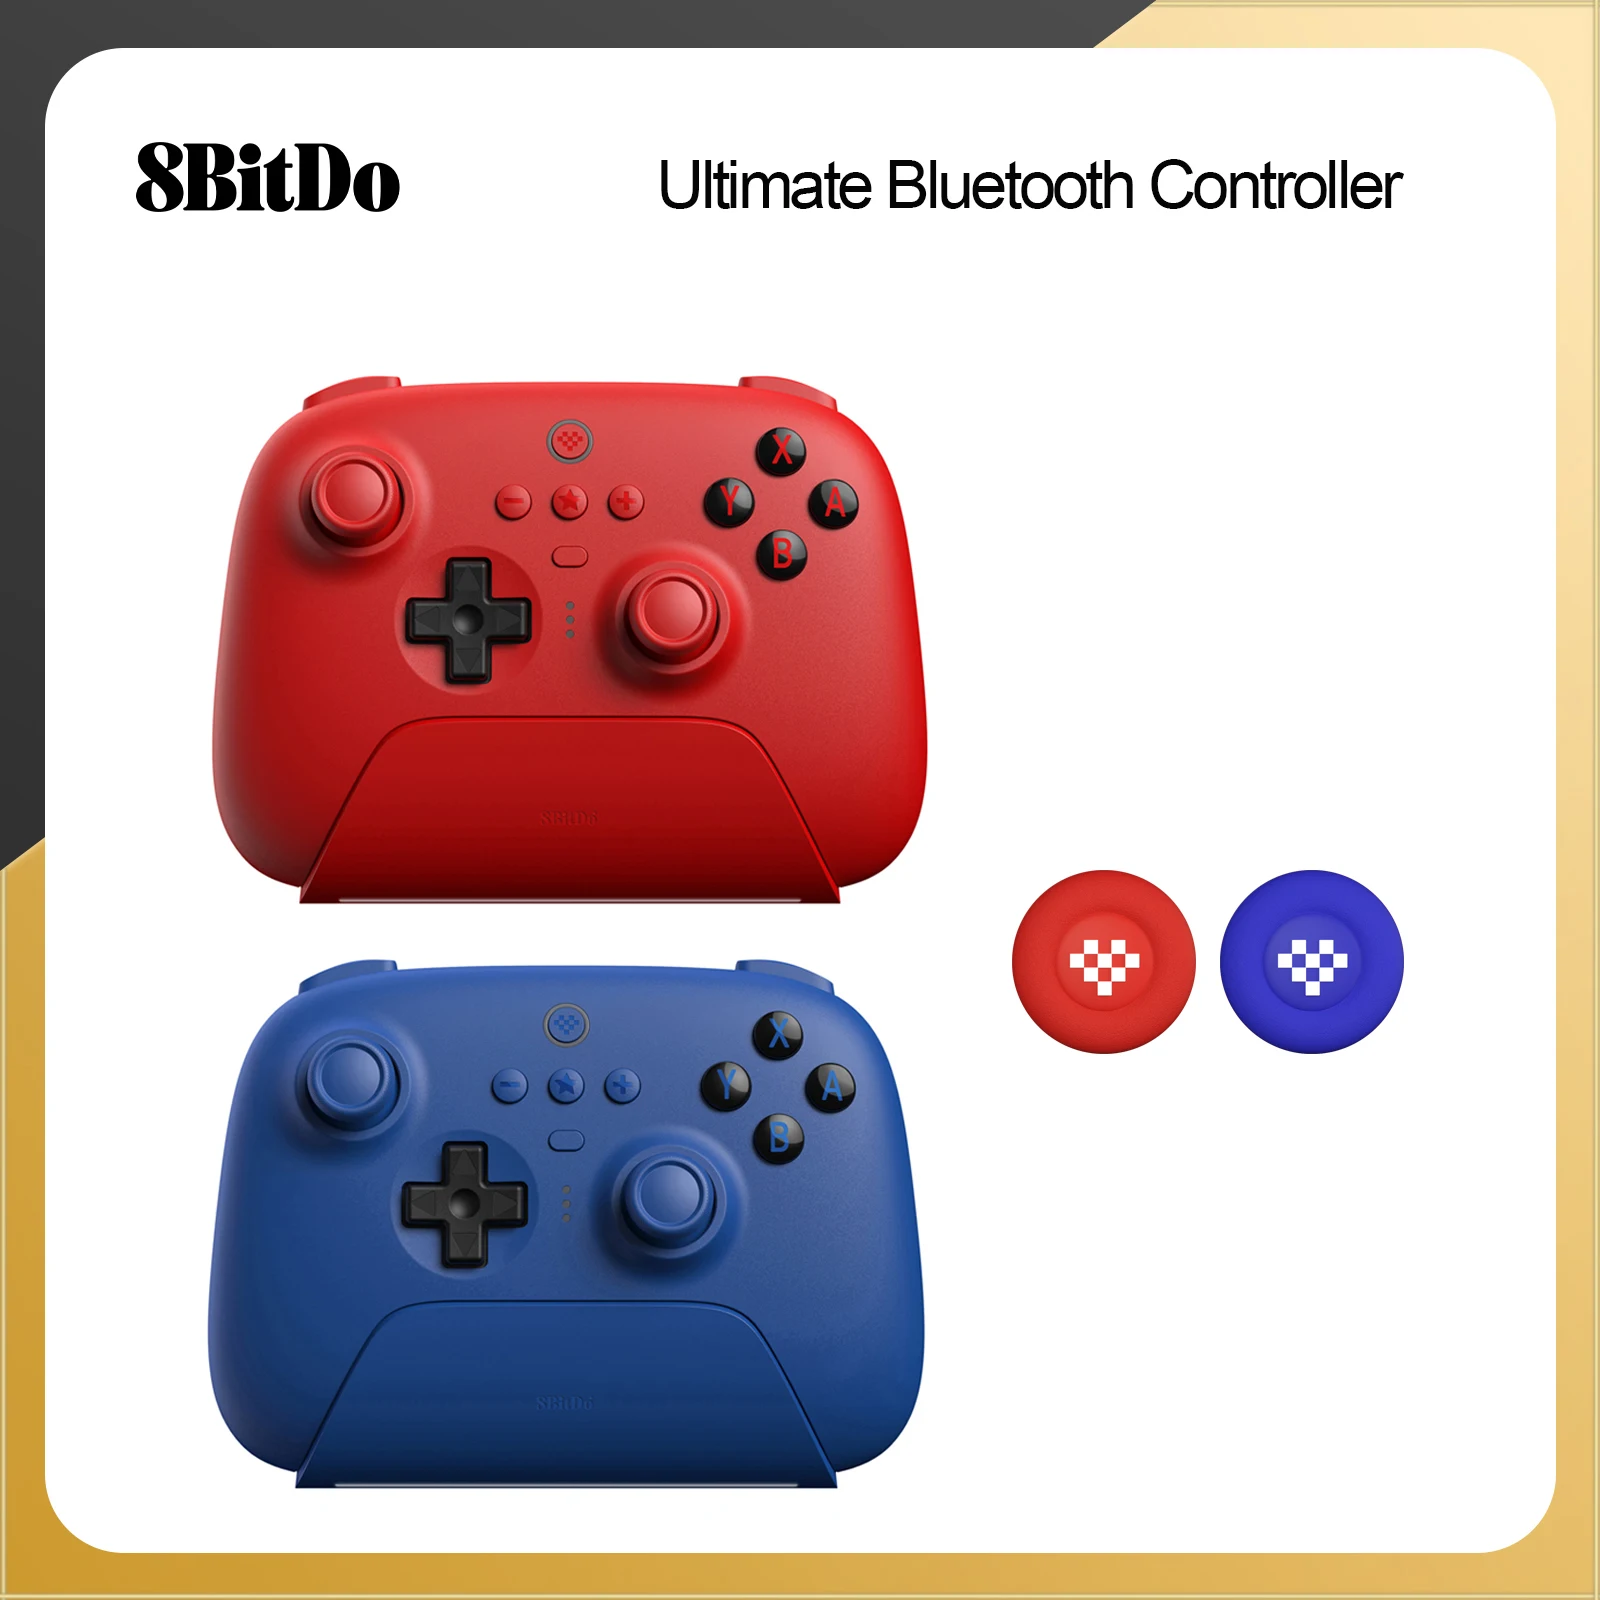 

8Bitdo Ultimate Bluetooth Controller with Charging Dock Wireless Gamepad with Hall Effect Sensing Joystick for Switch Windows PC